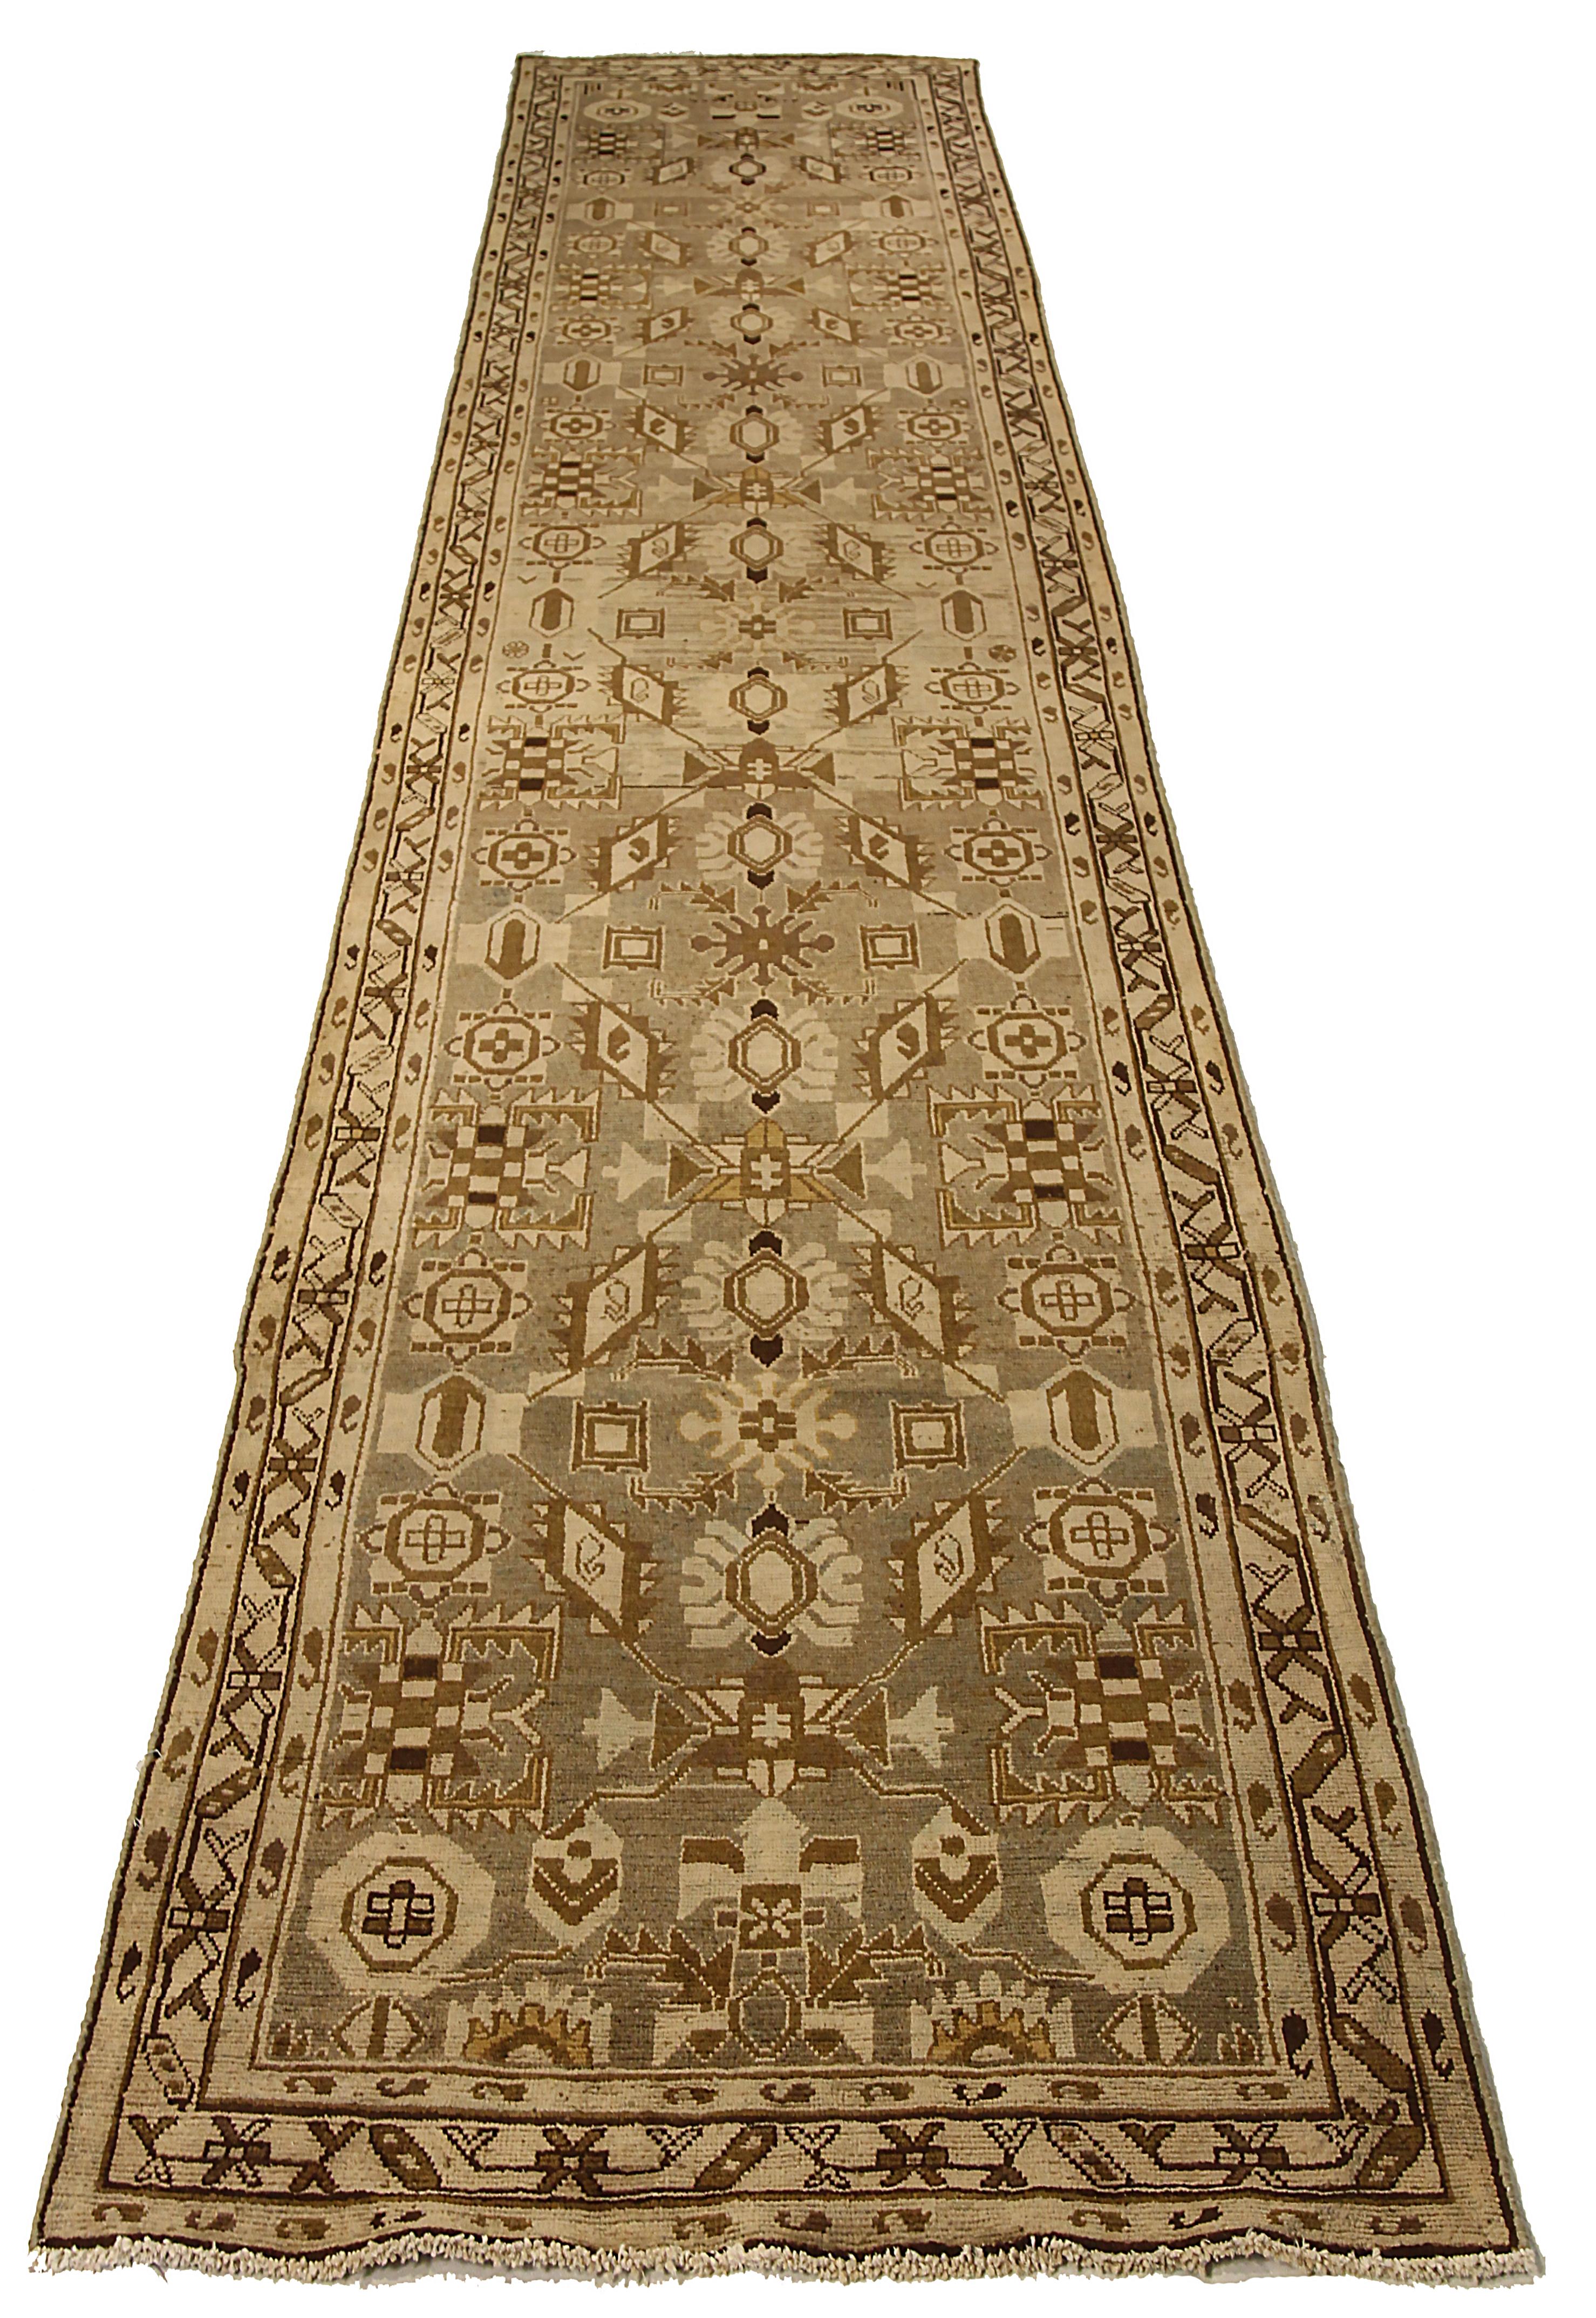 Antique Persian runner rug handwoven from the finest sheep’s wool. It’s colored with all-natural vegetable dyes that are safe for humans and pets. It’s a traditional Malayer design featuring geometric design on a beige field. It’s a lovely piece to